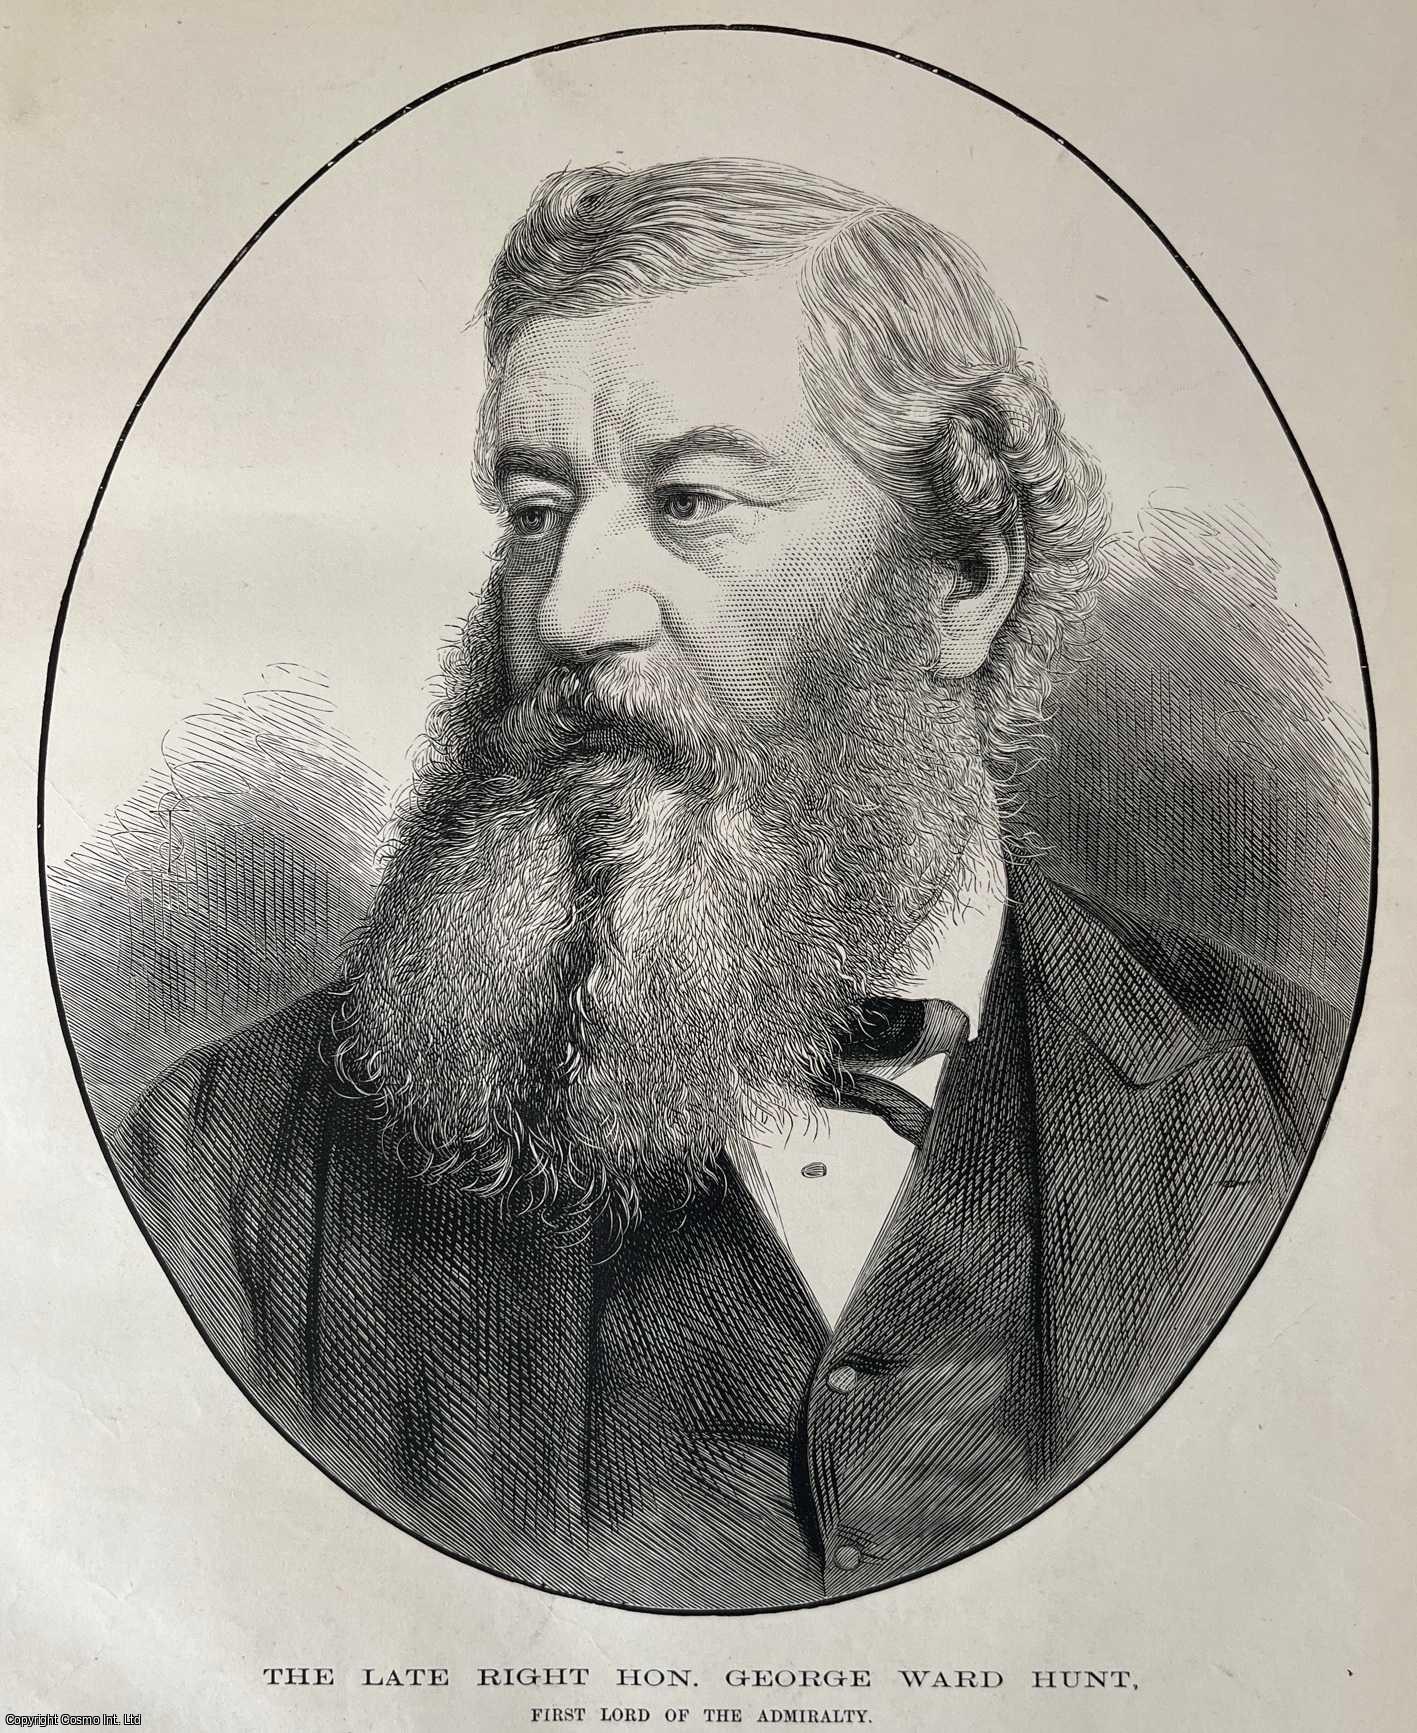 RT. HON. GEORGE WARD HUNT - Portrait of the Right Hon. George Ward Hunt. An original woodcut engraving, from the Illustrated London News, 1877.